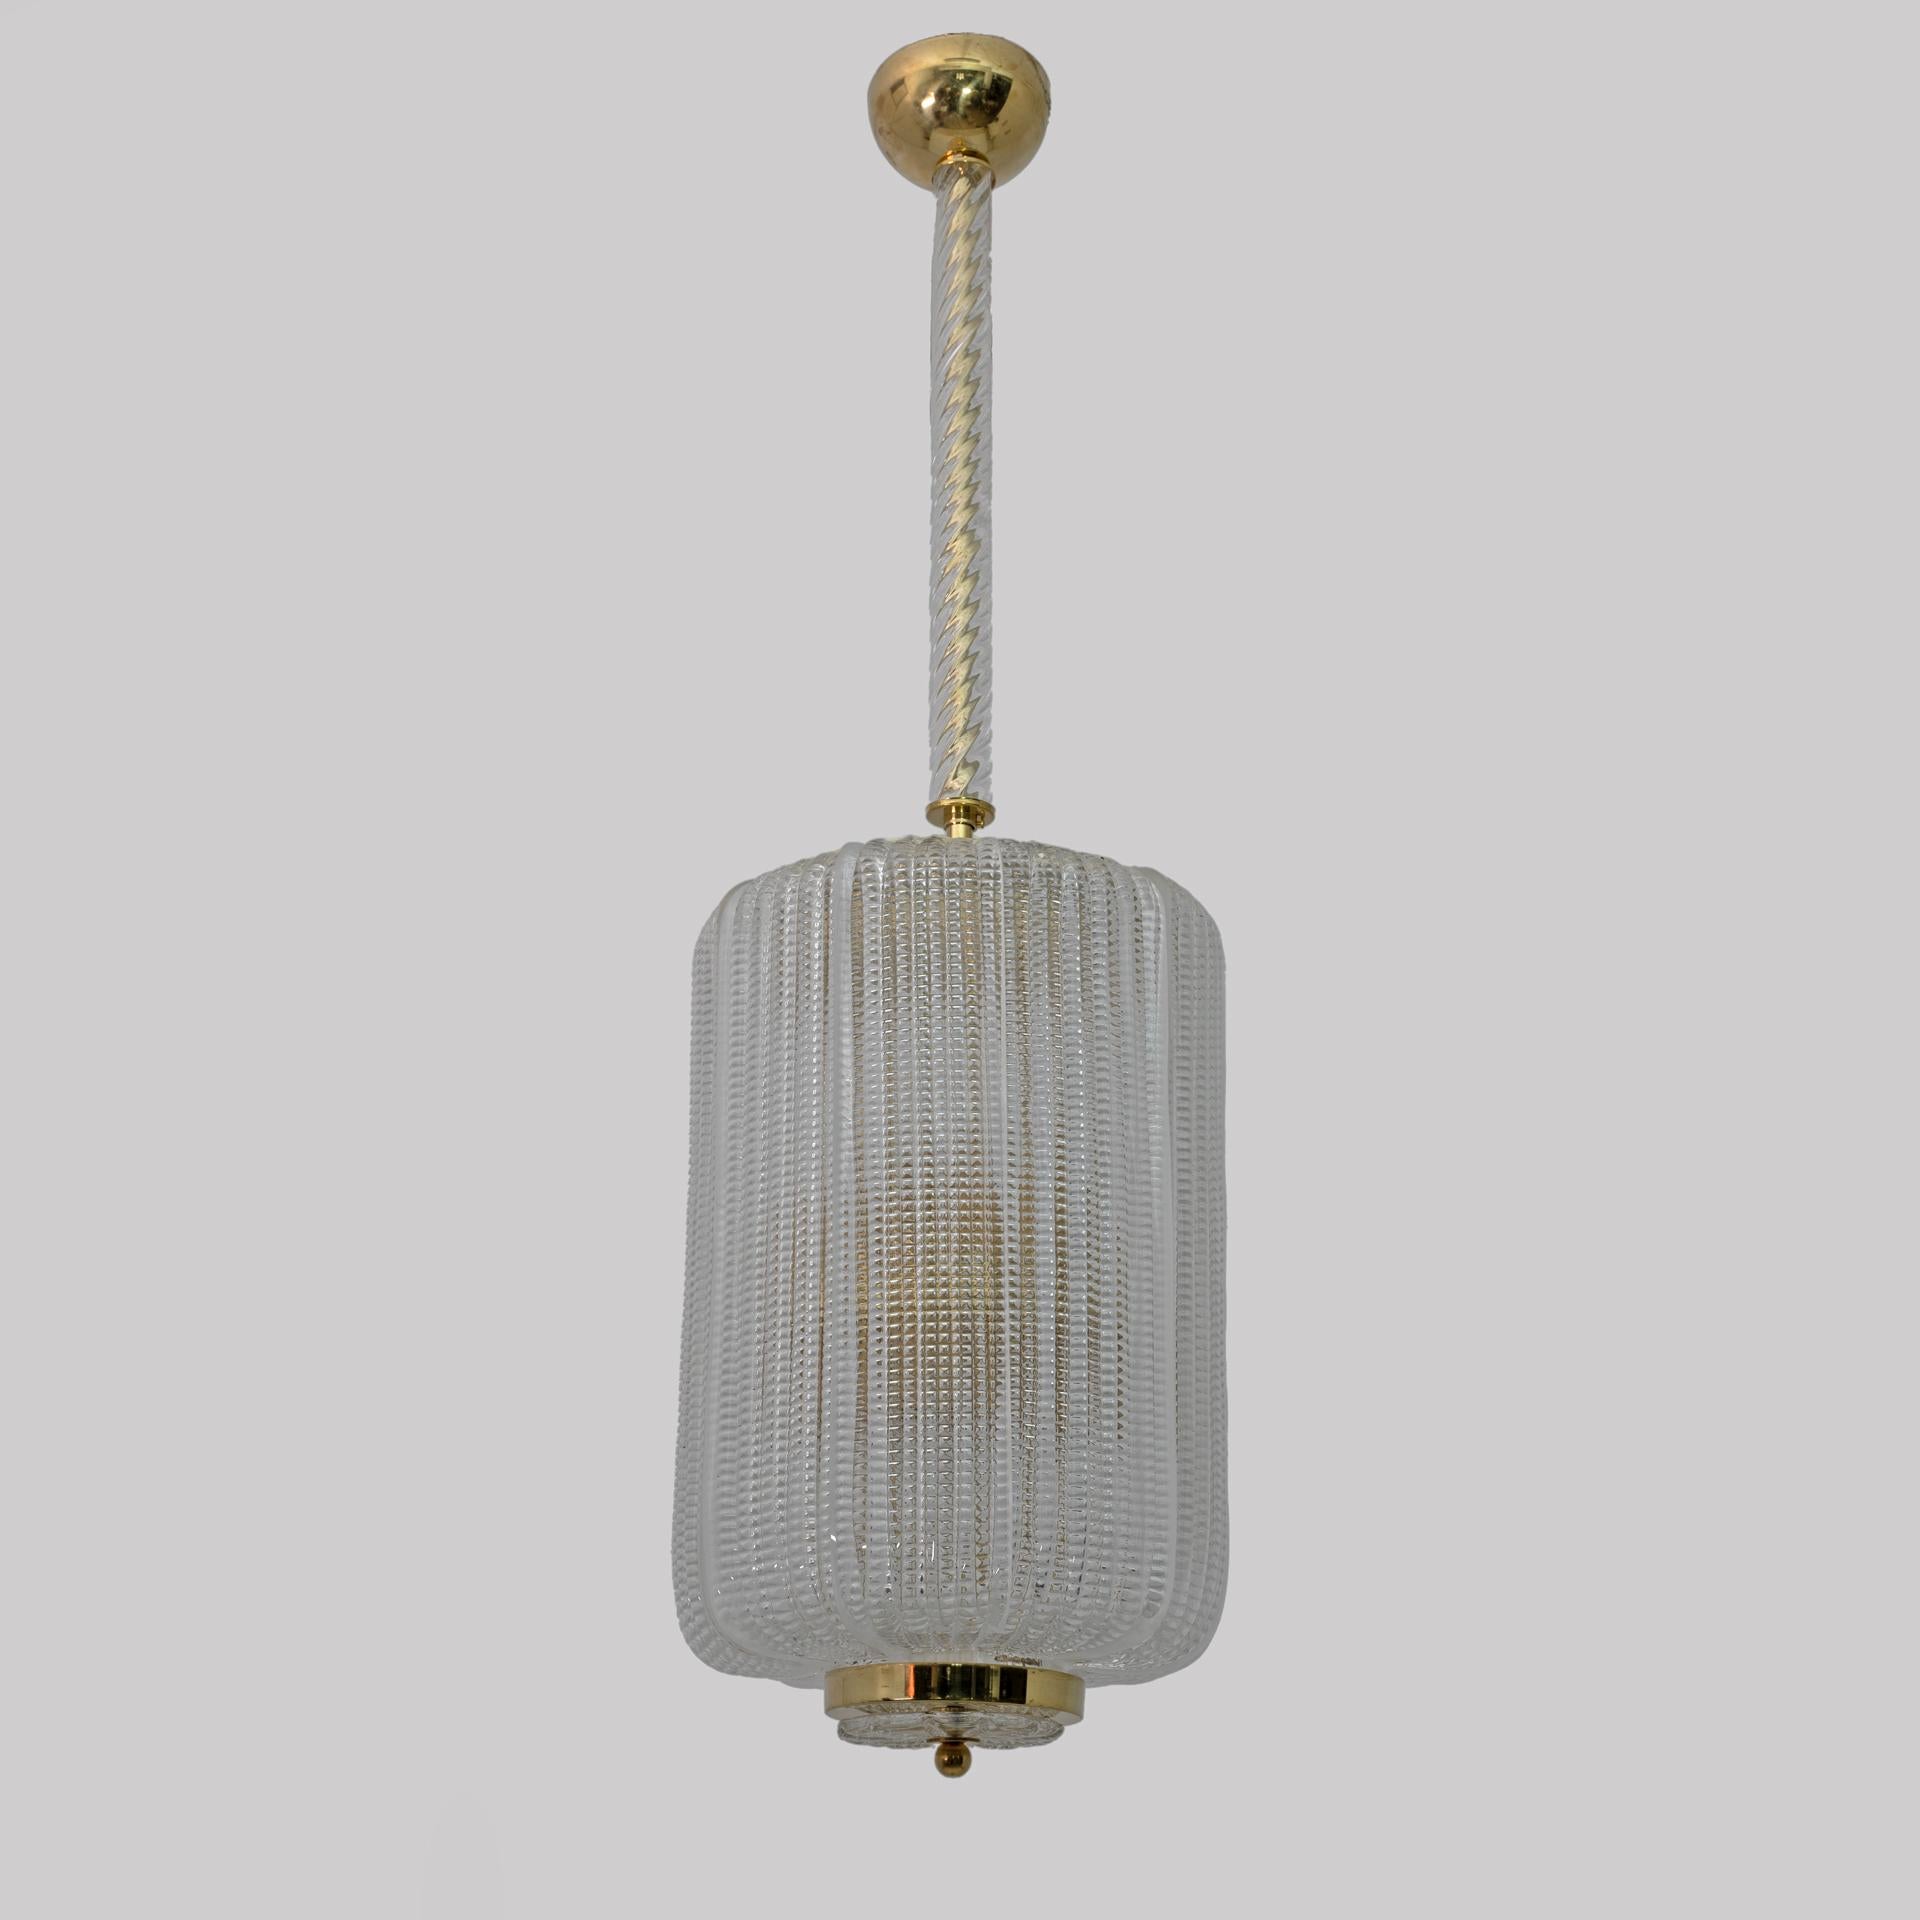 Art Deco style lantern chandelier with brass structure and roped glass diffuser, attributed to the architect and designer Tomaso Buzzi, ceiling lamp mod. 5265, from 1936.
Height of glass body 17.75 inches, 45 cm, with six E27 or E26 lamp holders for